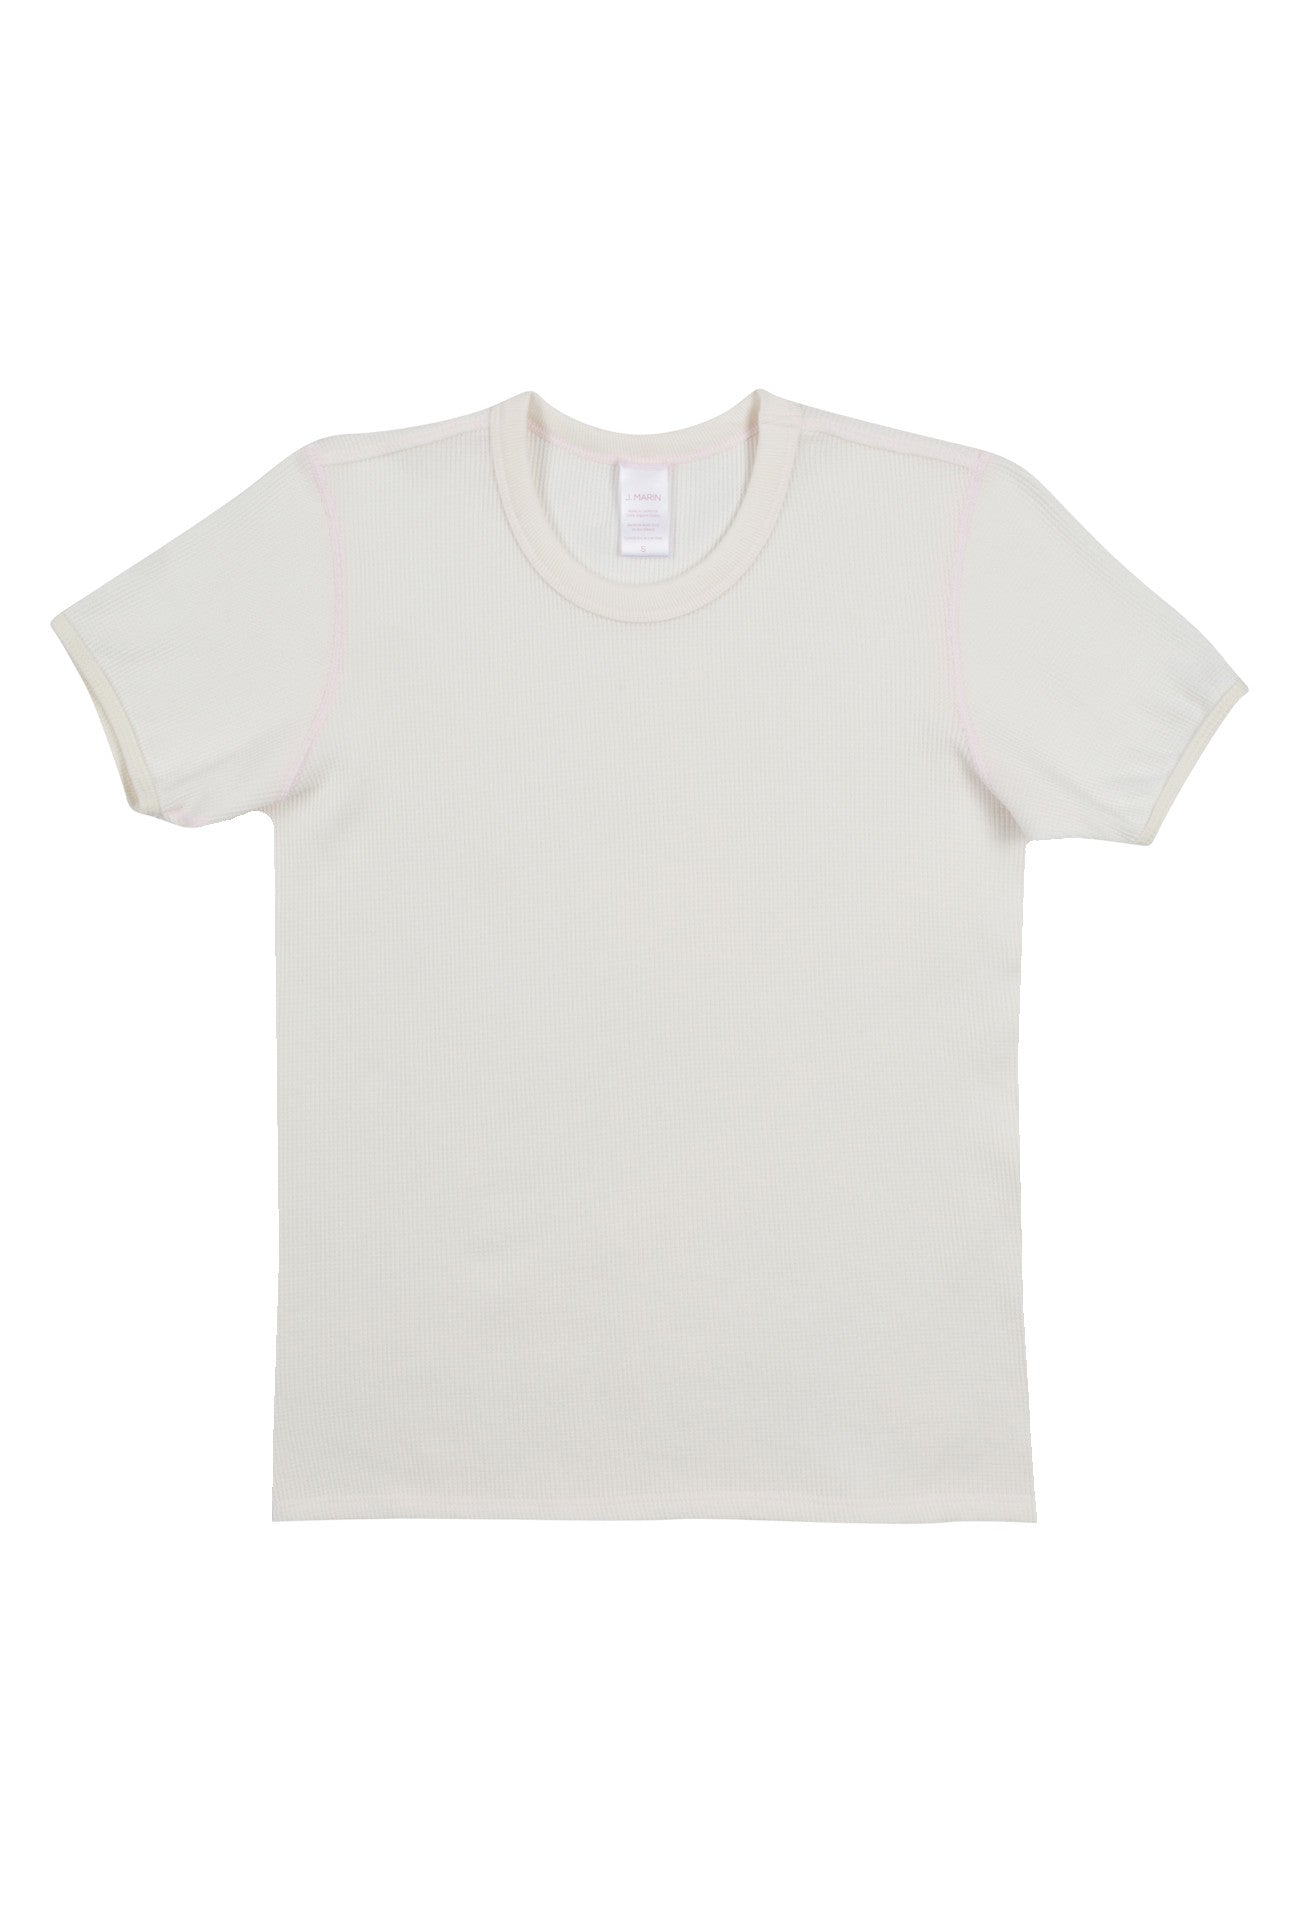 Vintage Style Classic Thermal Surplus Tee - Organic Cotton - Natural/Rosewater Pink - J. Marin